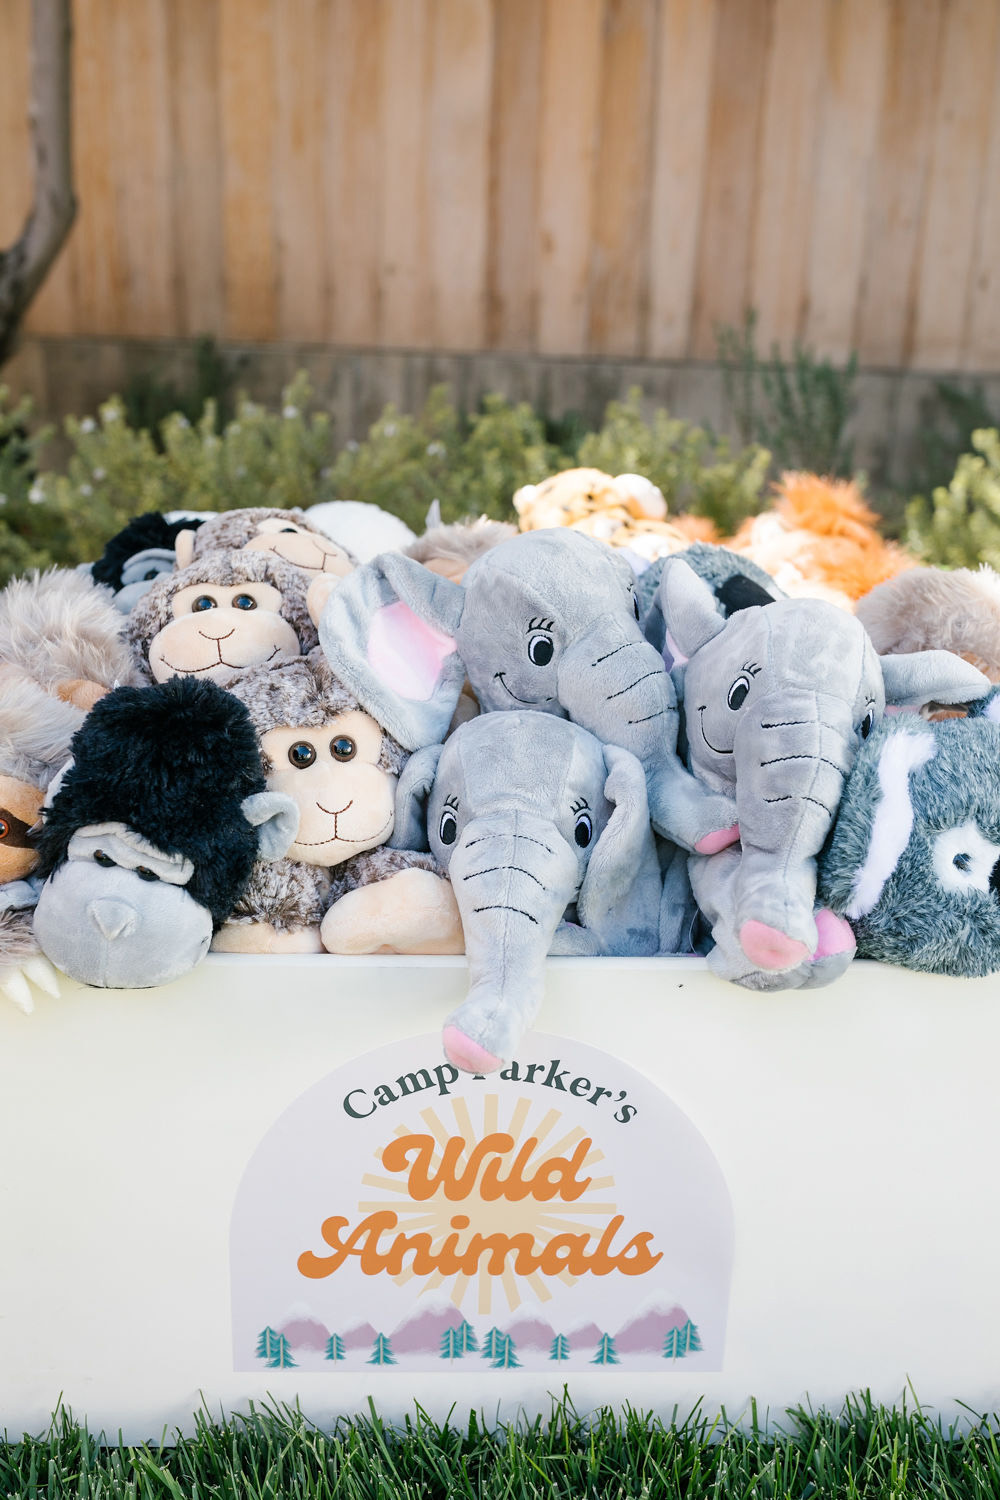 stuffed animal favors at kids birthday party